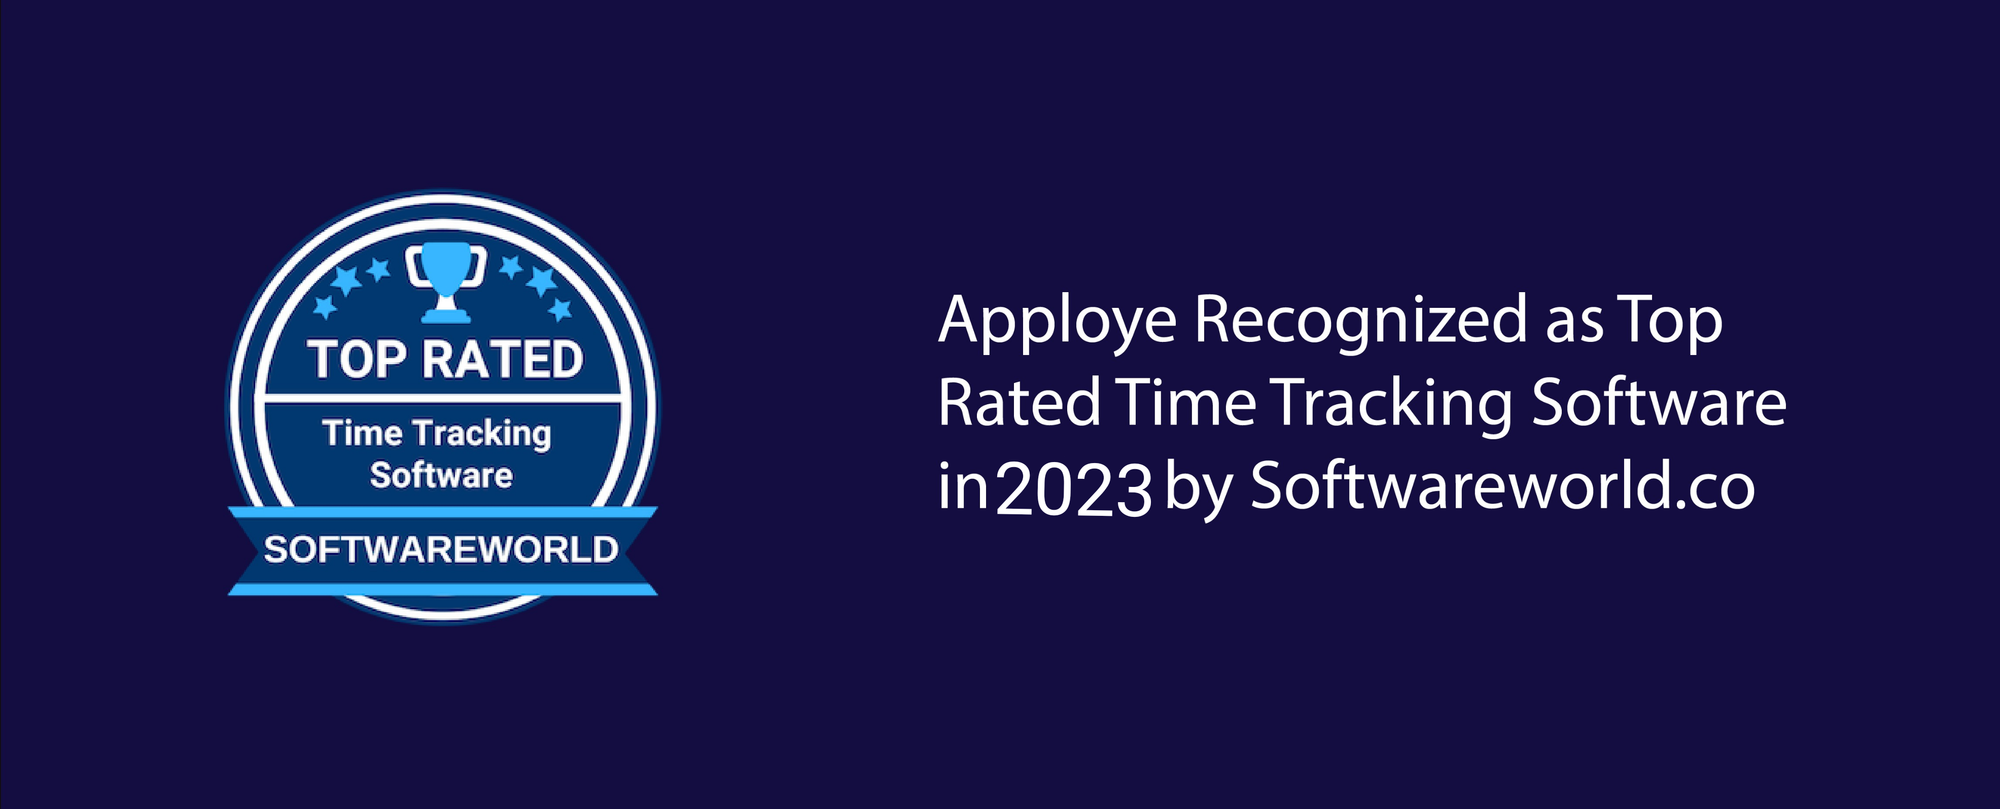 Apploye Recognized as Top Rated Time Tracking Software in 2023